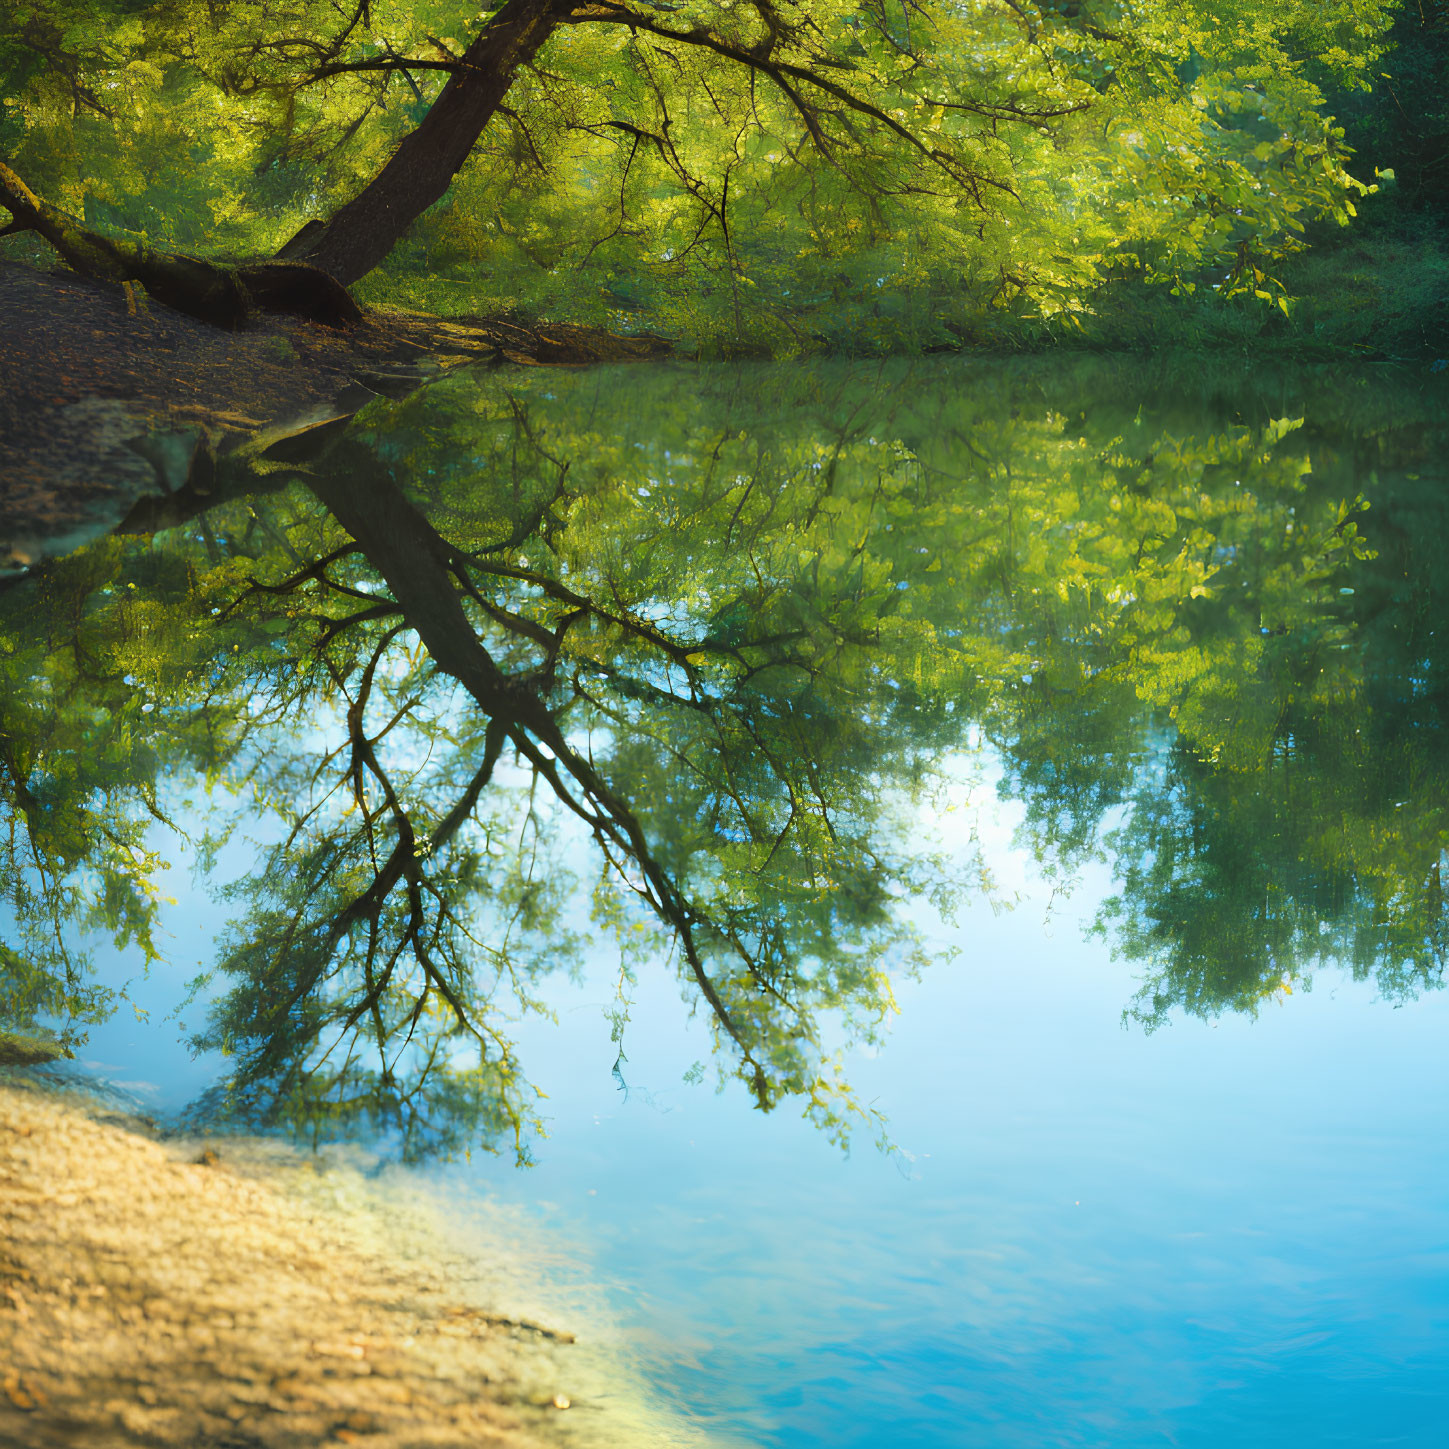 Serene lakeside landscape with green trees, water reflections, and sunlight.